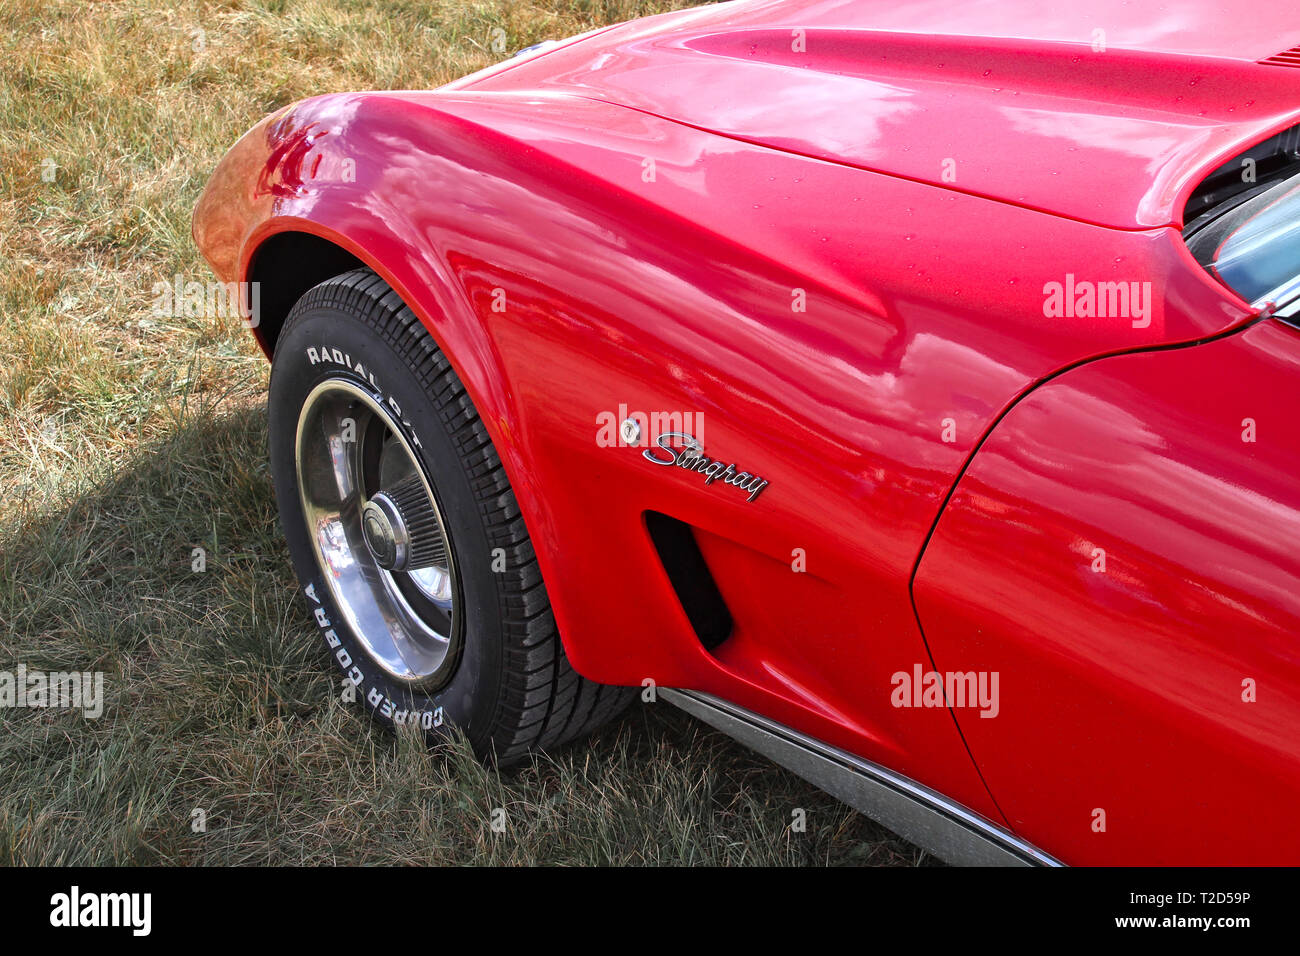 Hood And Left Fender Of A Red Corvette Stingray At Pick Nick 18 Classic Car Show In Forssa Finland 05 08 18 Forssa Finland Stock Photo Alamy